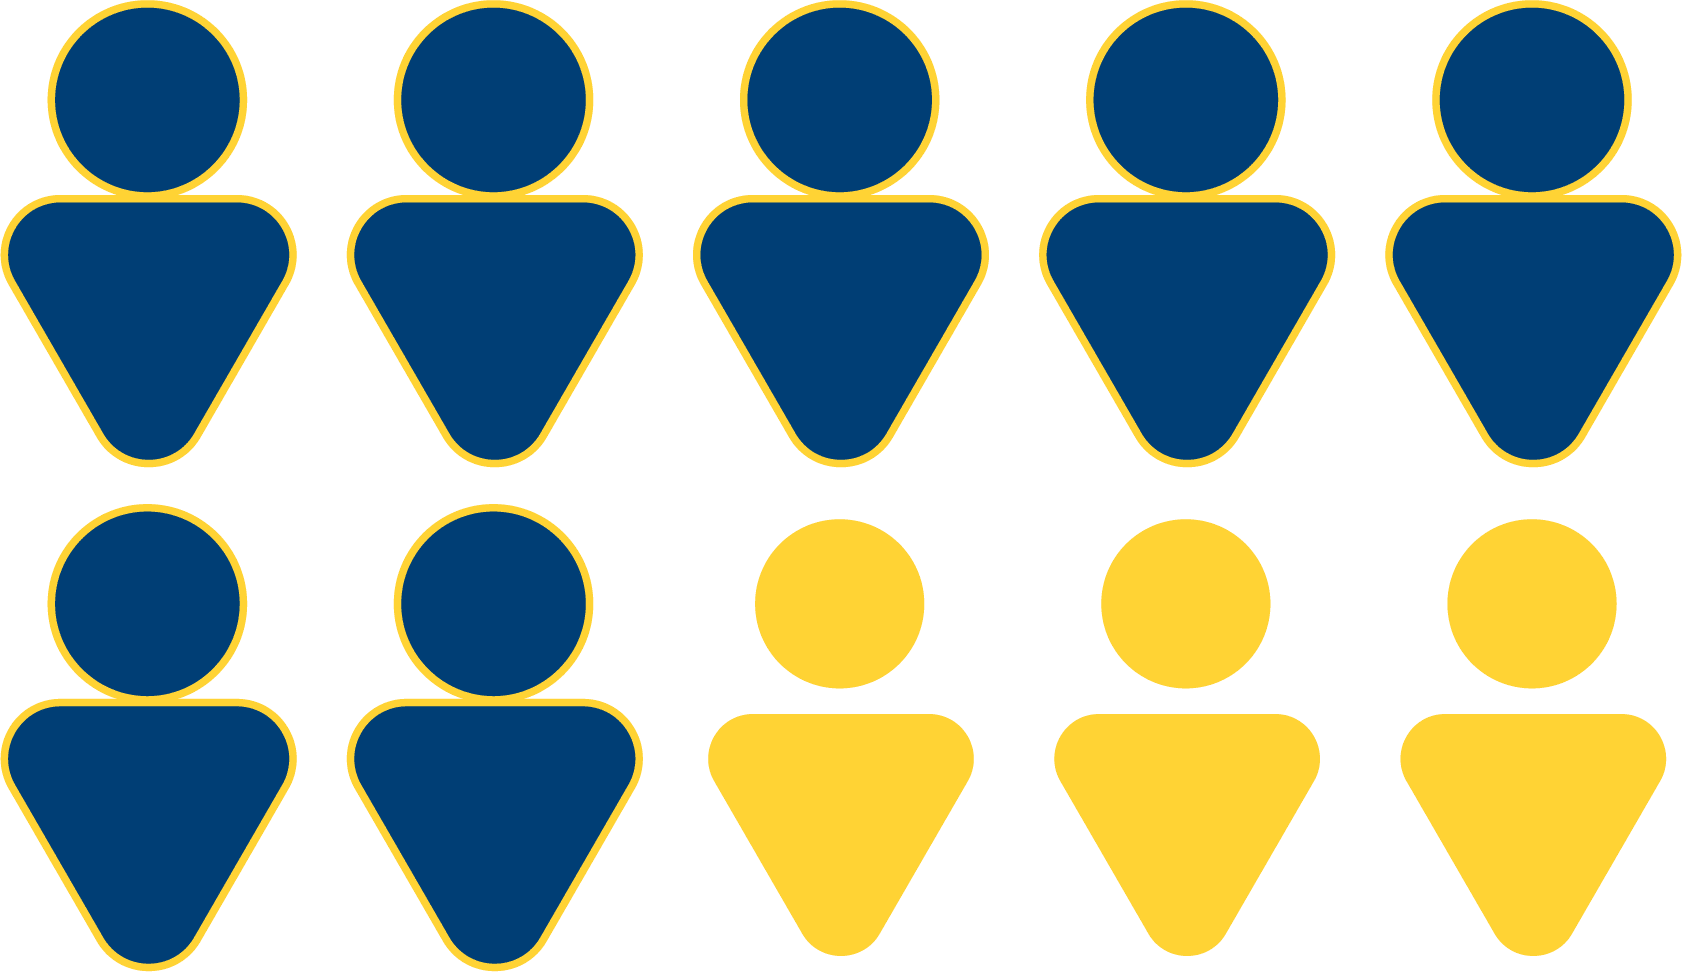 Graphic shows 10 person icons, representing 10 families. 7 of them are blue and 3 of them are yellow, showing that 7 out of 10 families believe their child generally feels safe at school